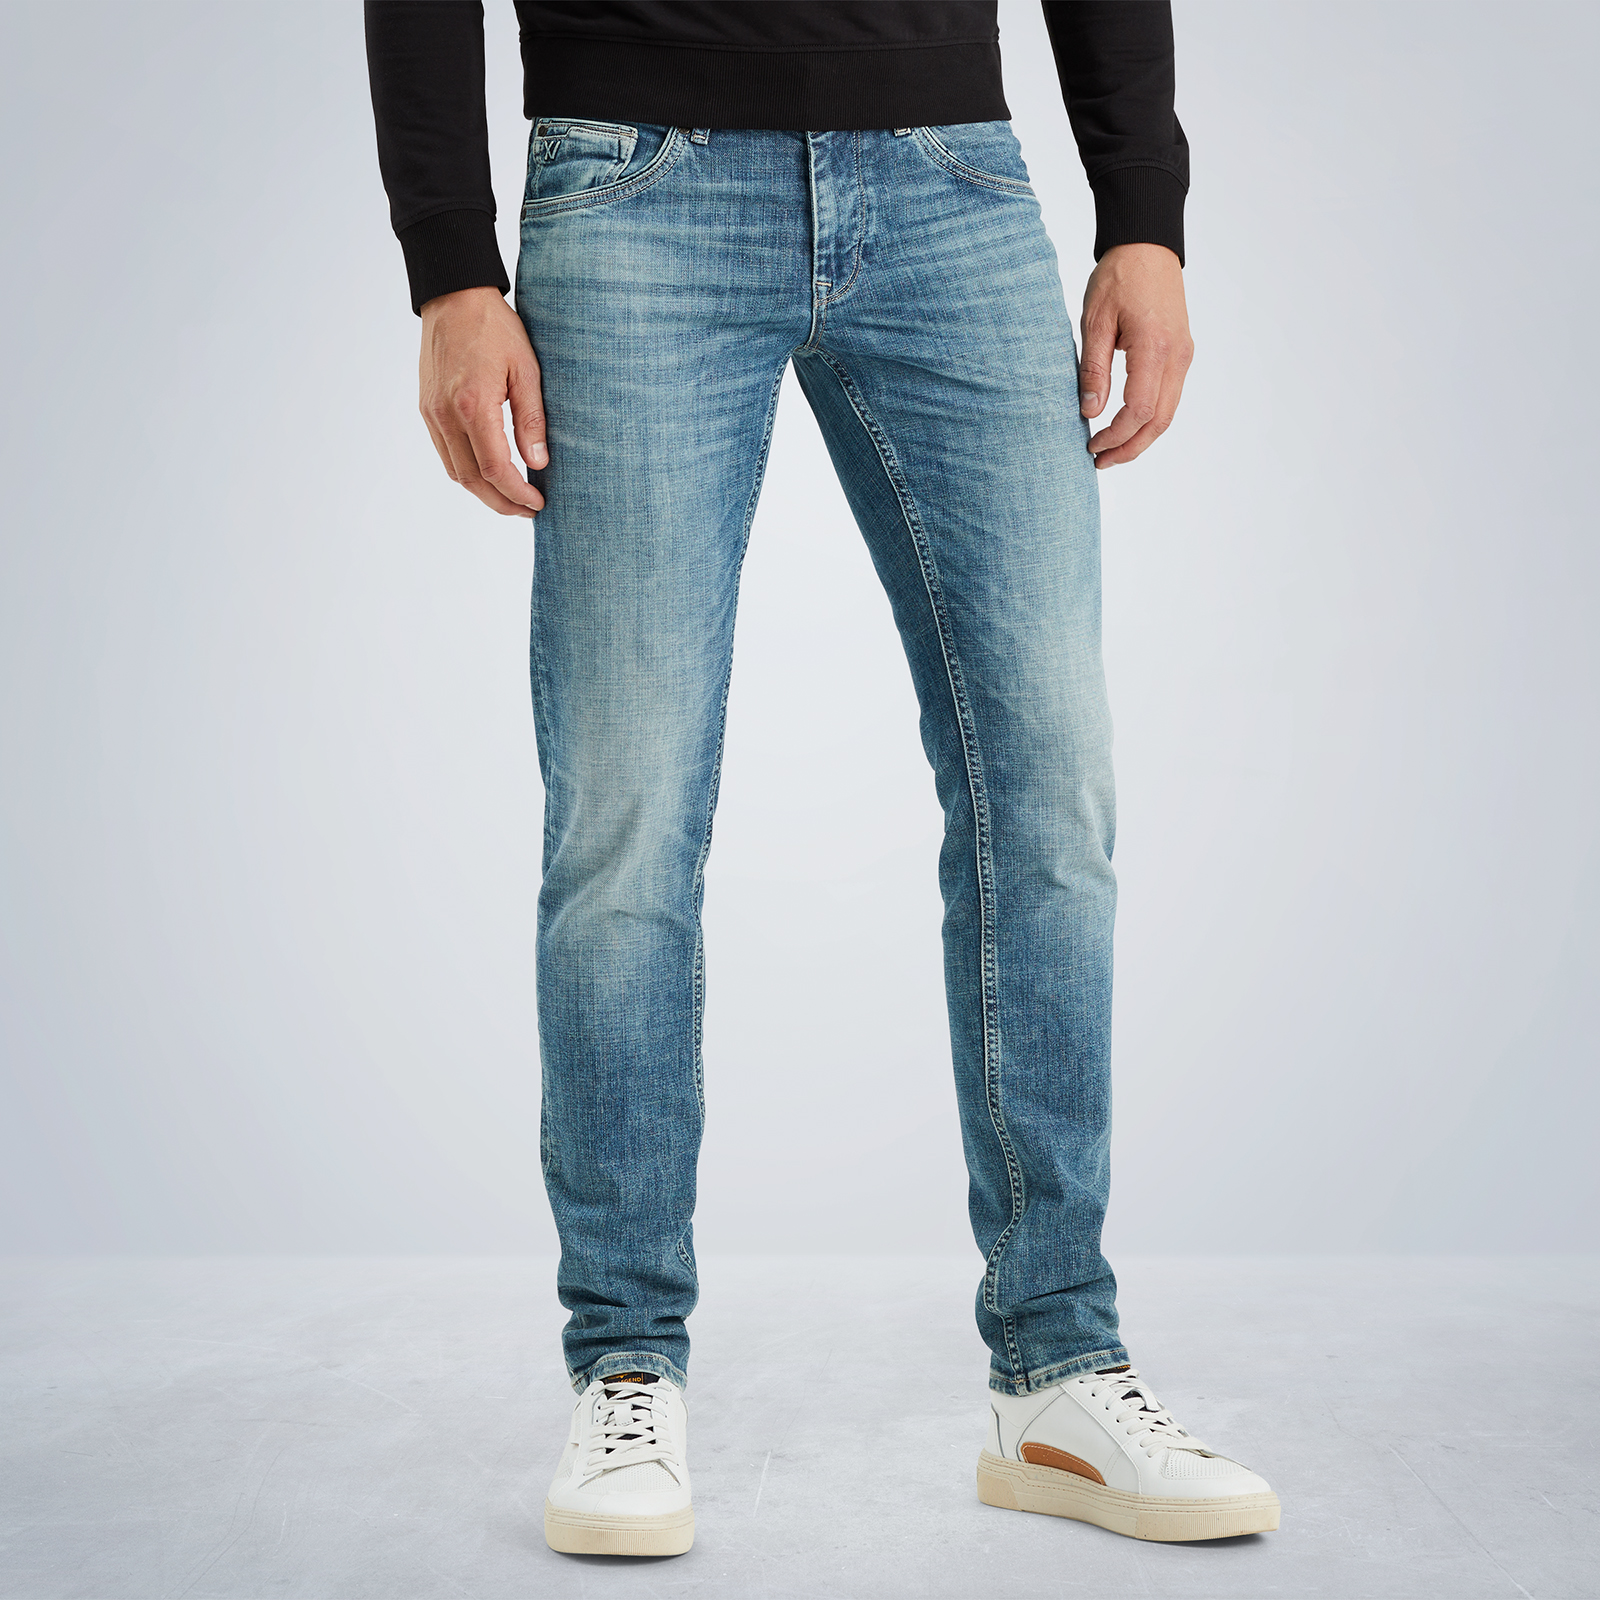 LEGEND shipping PME Free Jeans | returns and | XV Denim